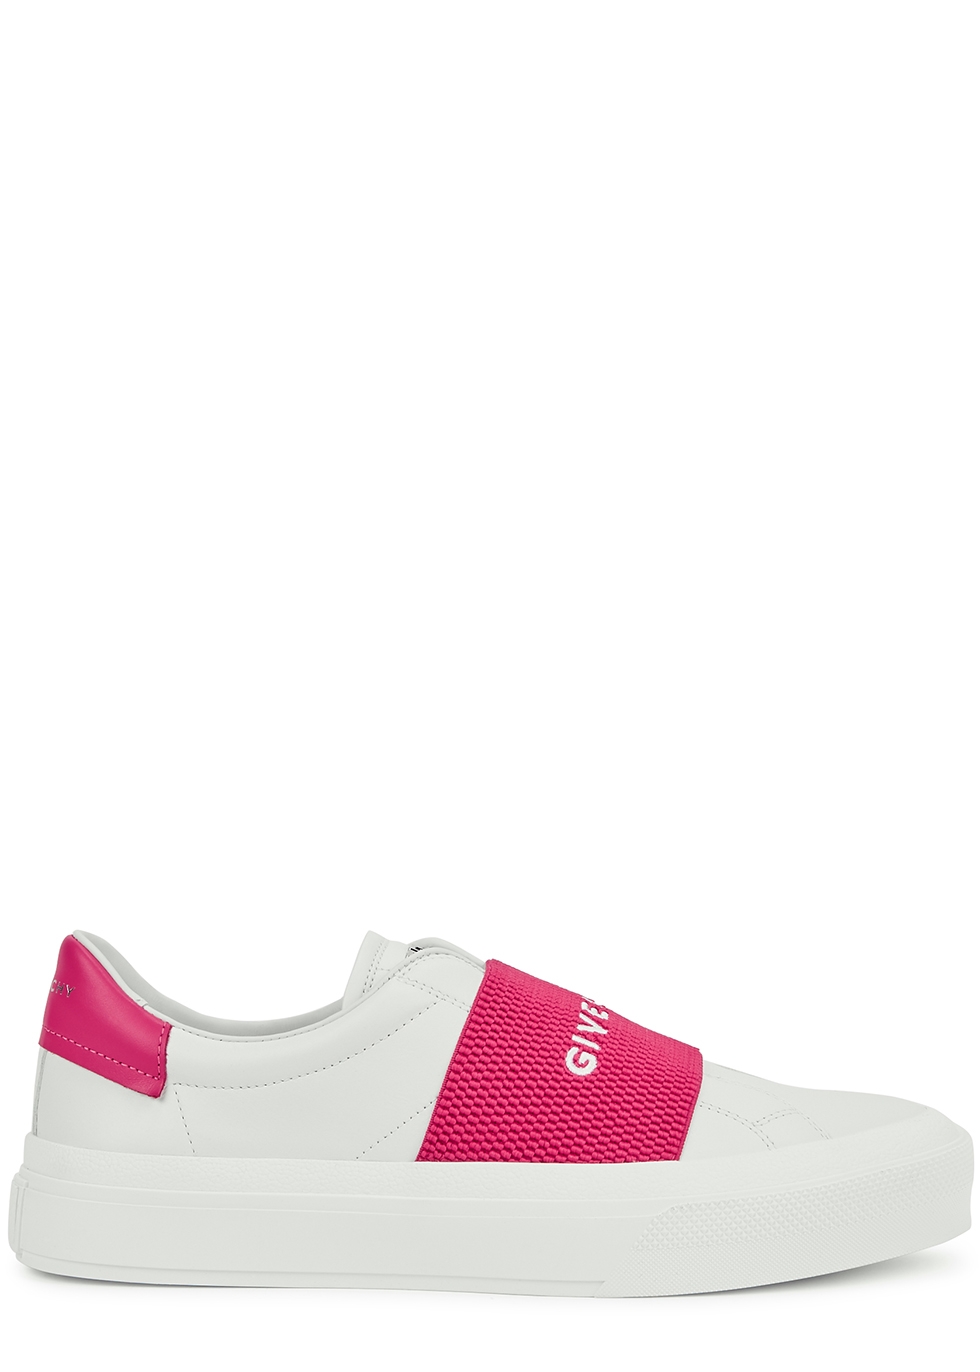 Givenchy City Sport white leather sneakers